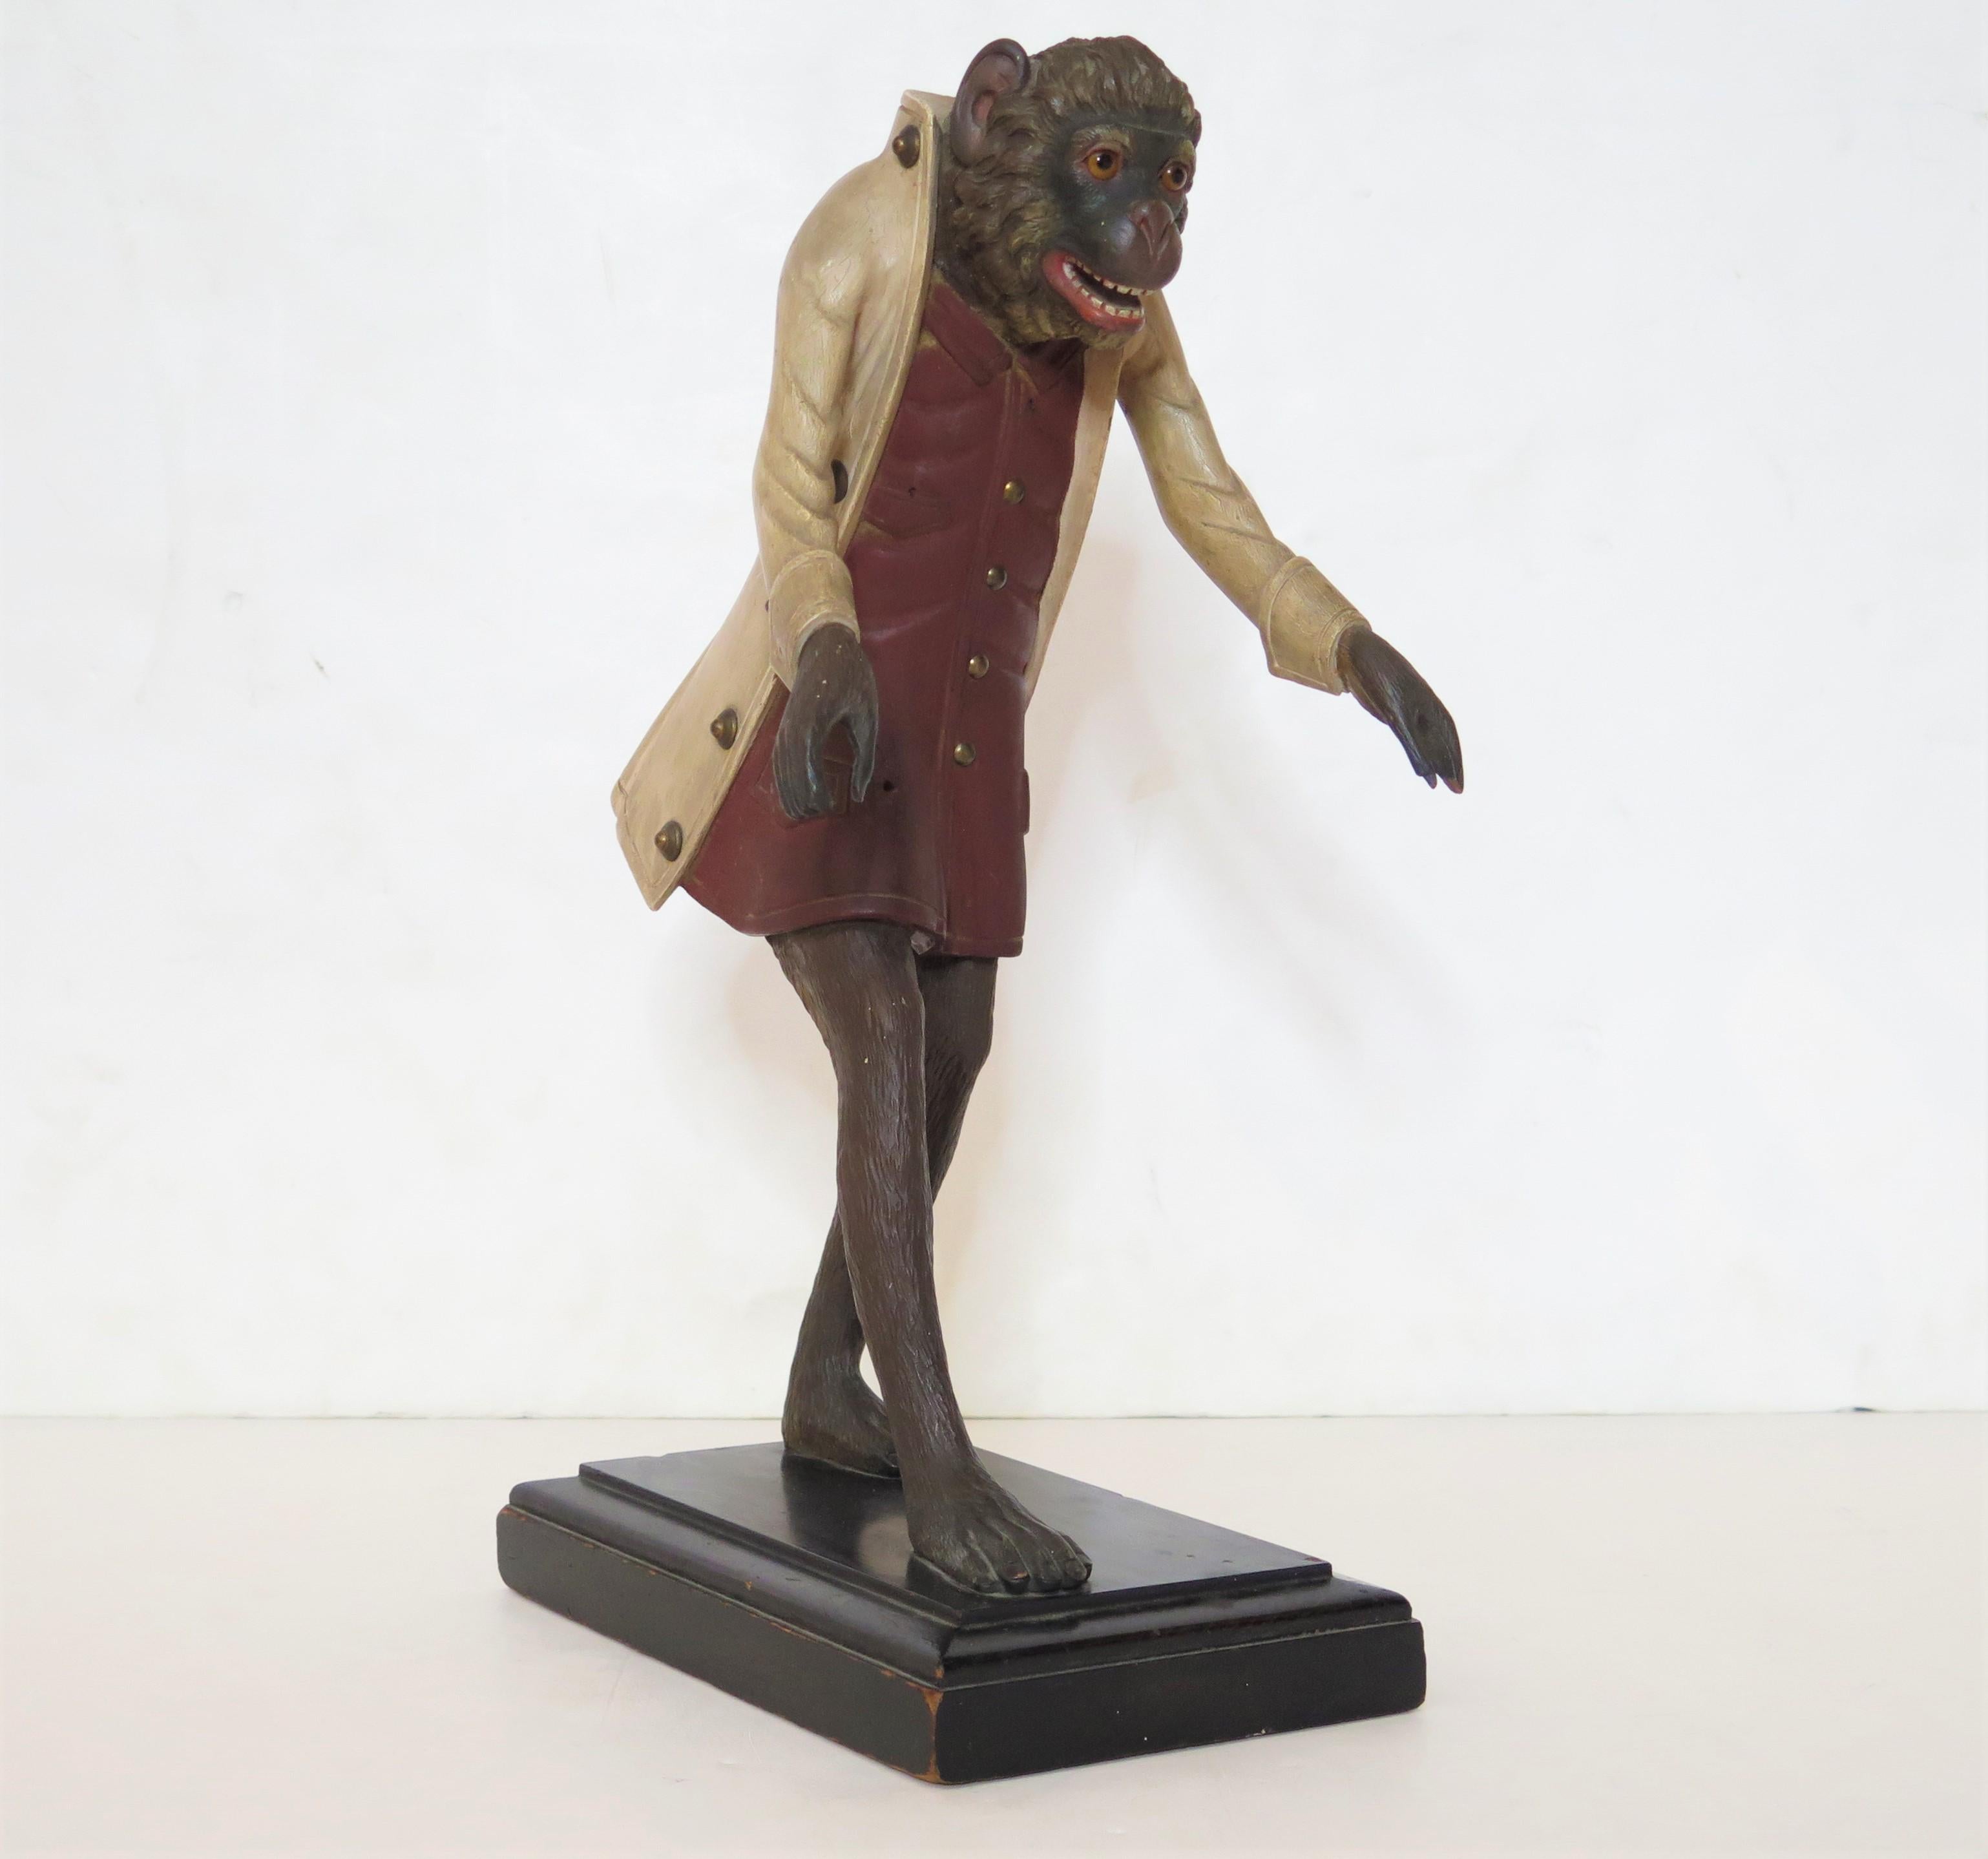 a finely carved wooden monkey butler / servant / footman figure on stand, glass eyes, open mouth with teeth, once held a tray in its outstretched arms / hands (missing / lost to time), top button missing from waistcoat, also missing a pocket watch